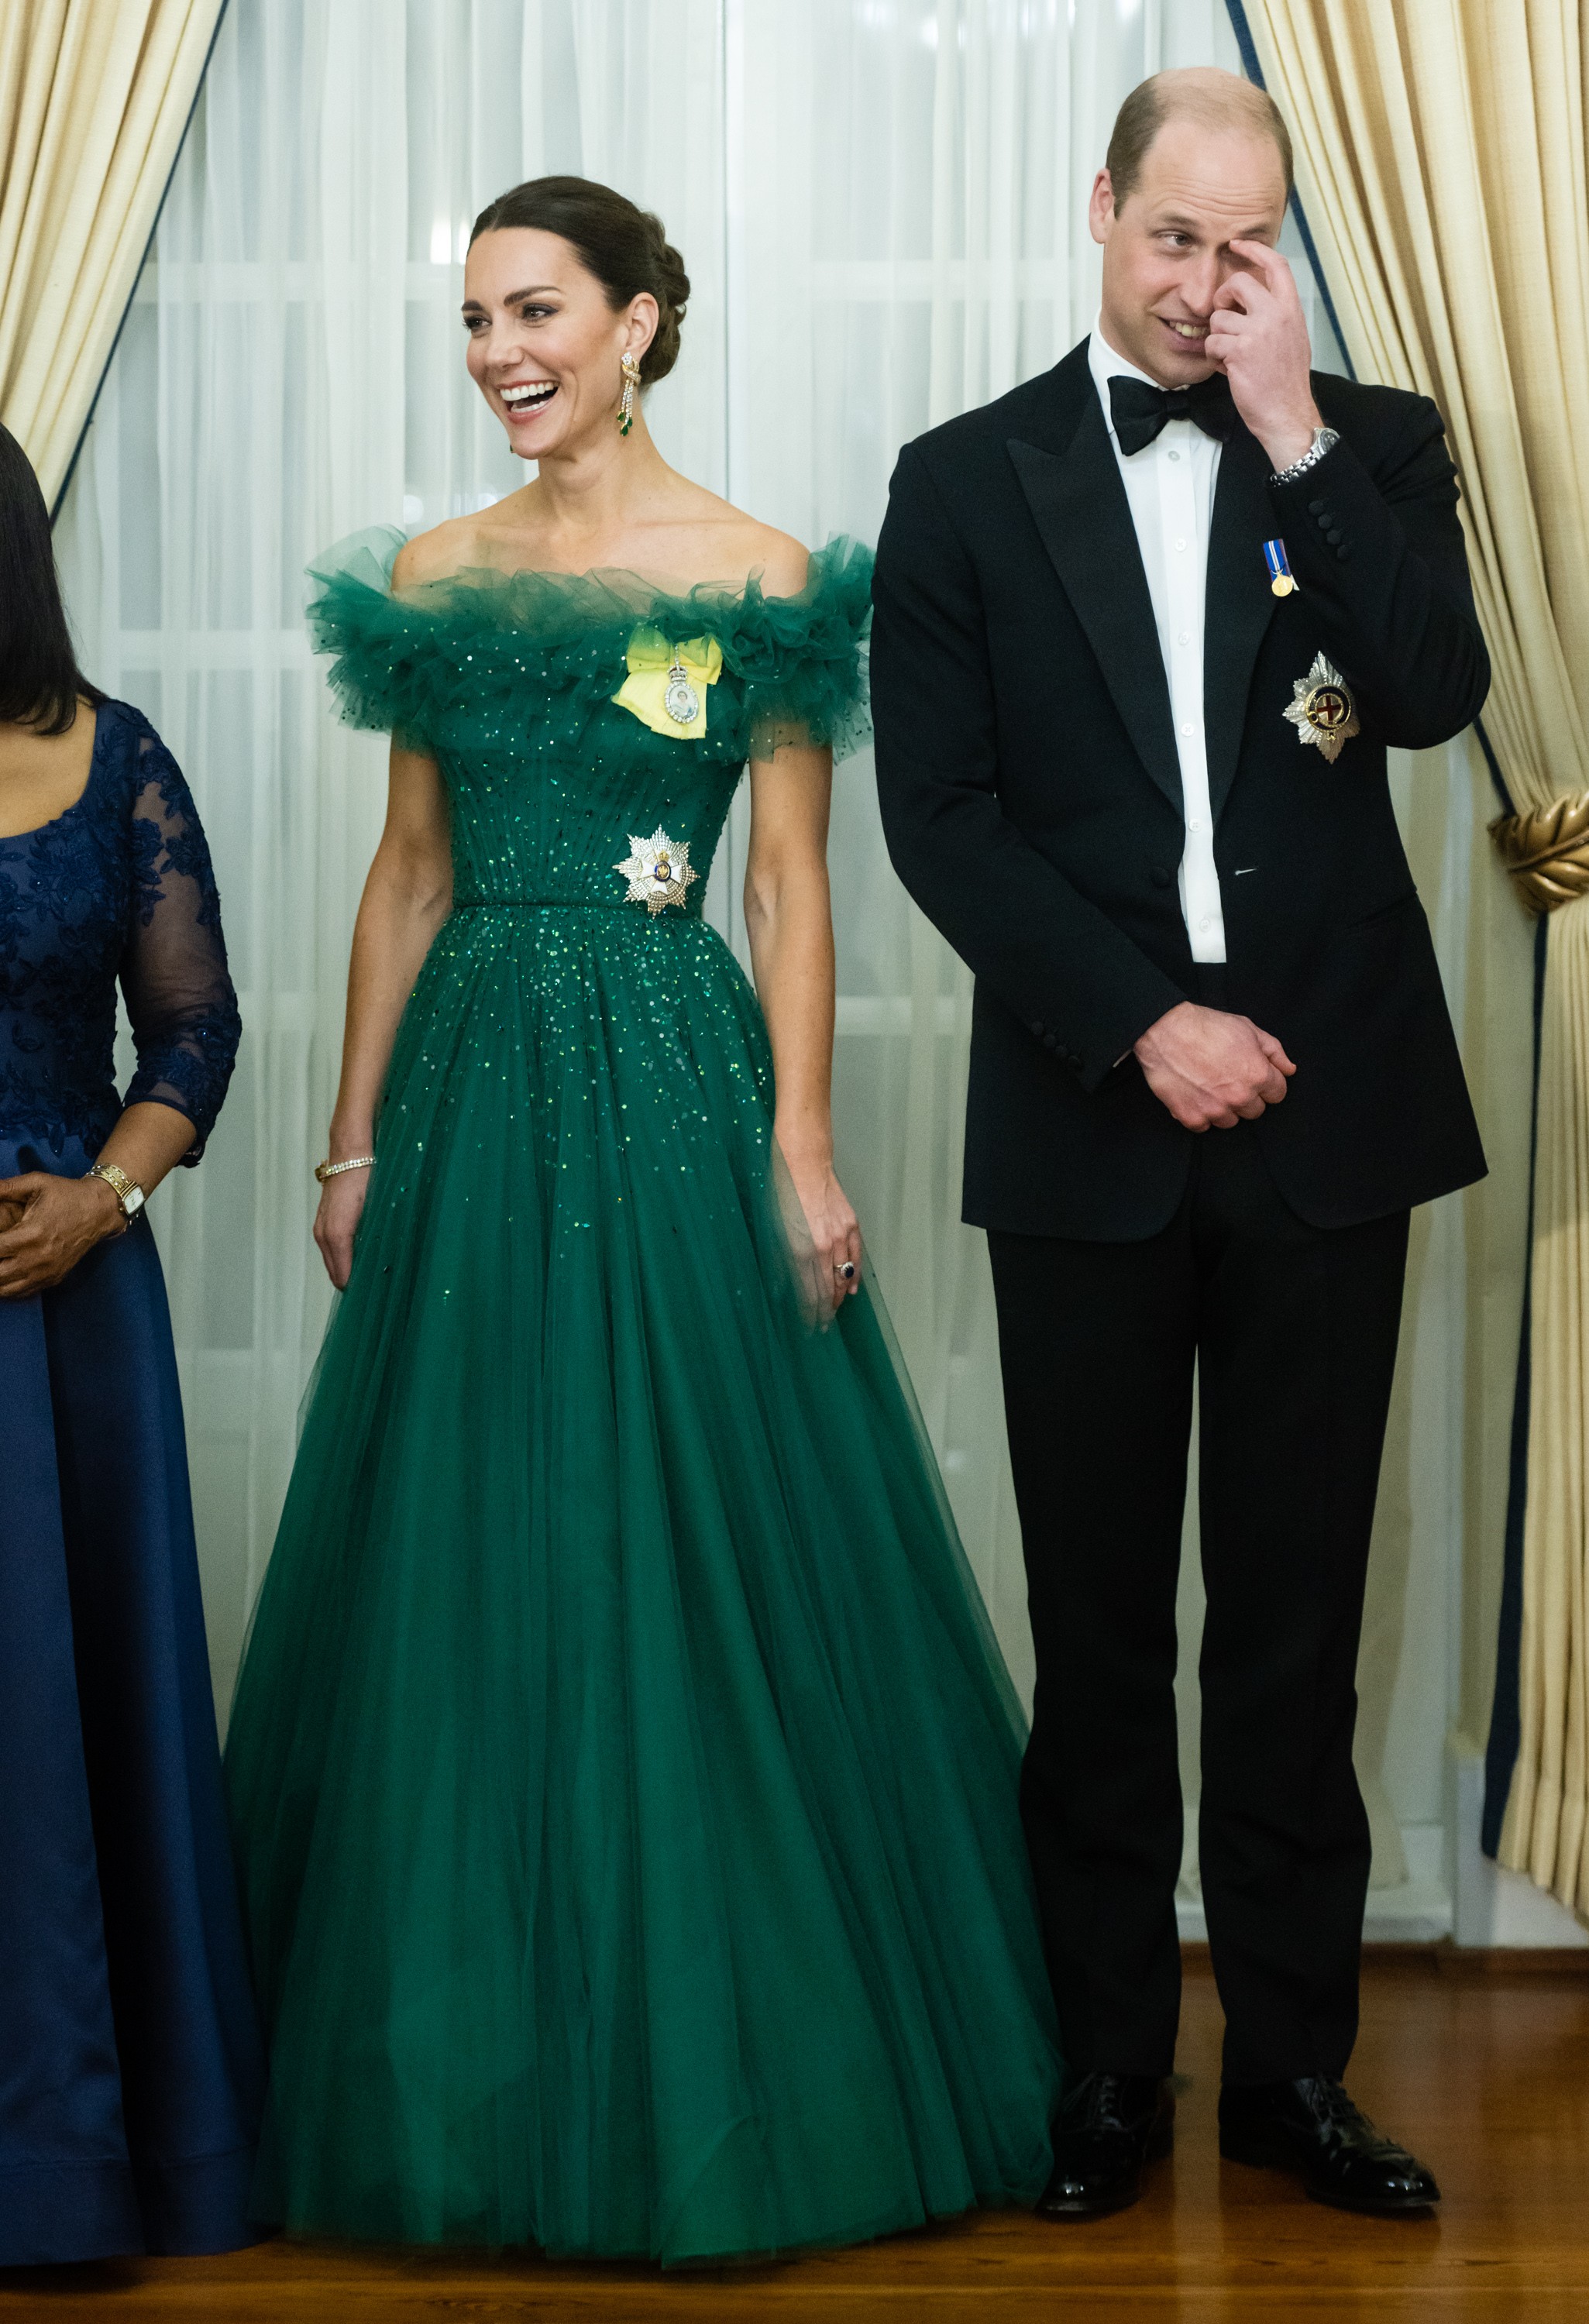 KINGSTON, JAMAICA - MARCH 23: Catherine, Duchess of Cambridge and Prince William, Duke of Cambridge attend a dinner hosted by the Governor General of Jamaica at King's House on March 23, 2022 in Kingston, Jamaica. (Photo by Samir Hussein - Pool/WireImage) (Foto: Samir Hussein/WireImage)